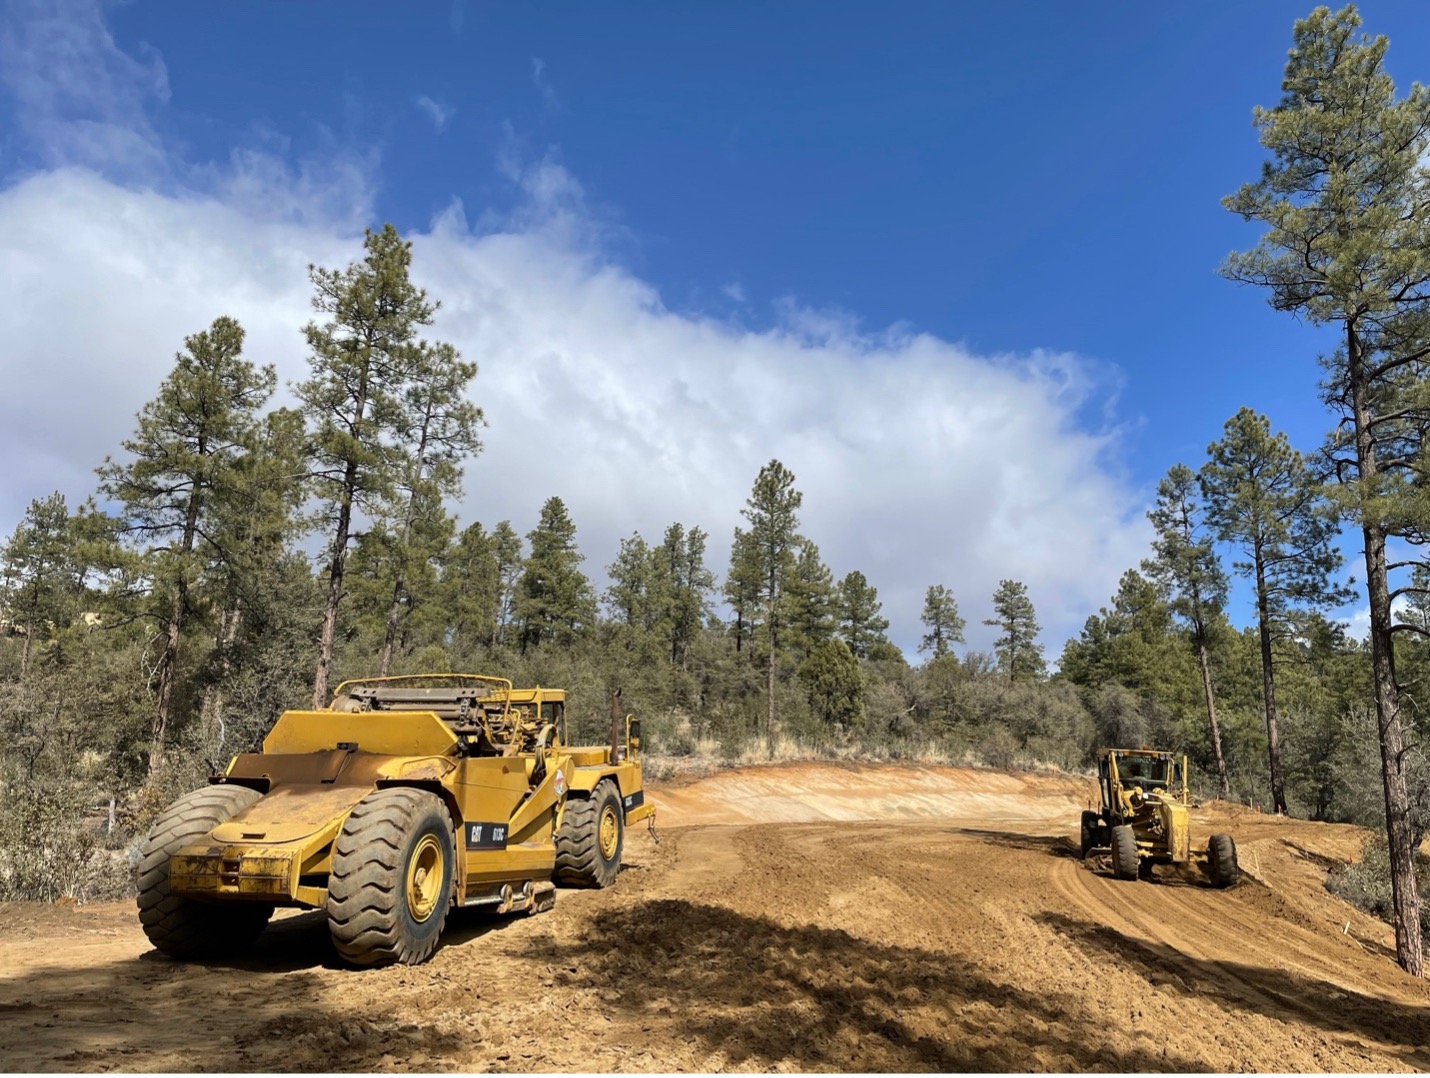 Two bulldozers creating a fire-wise dirt road in the forest.